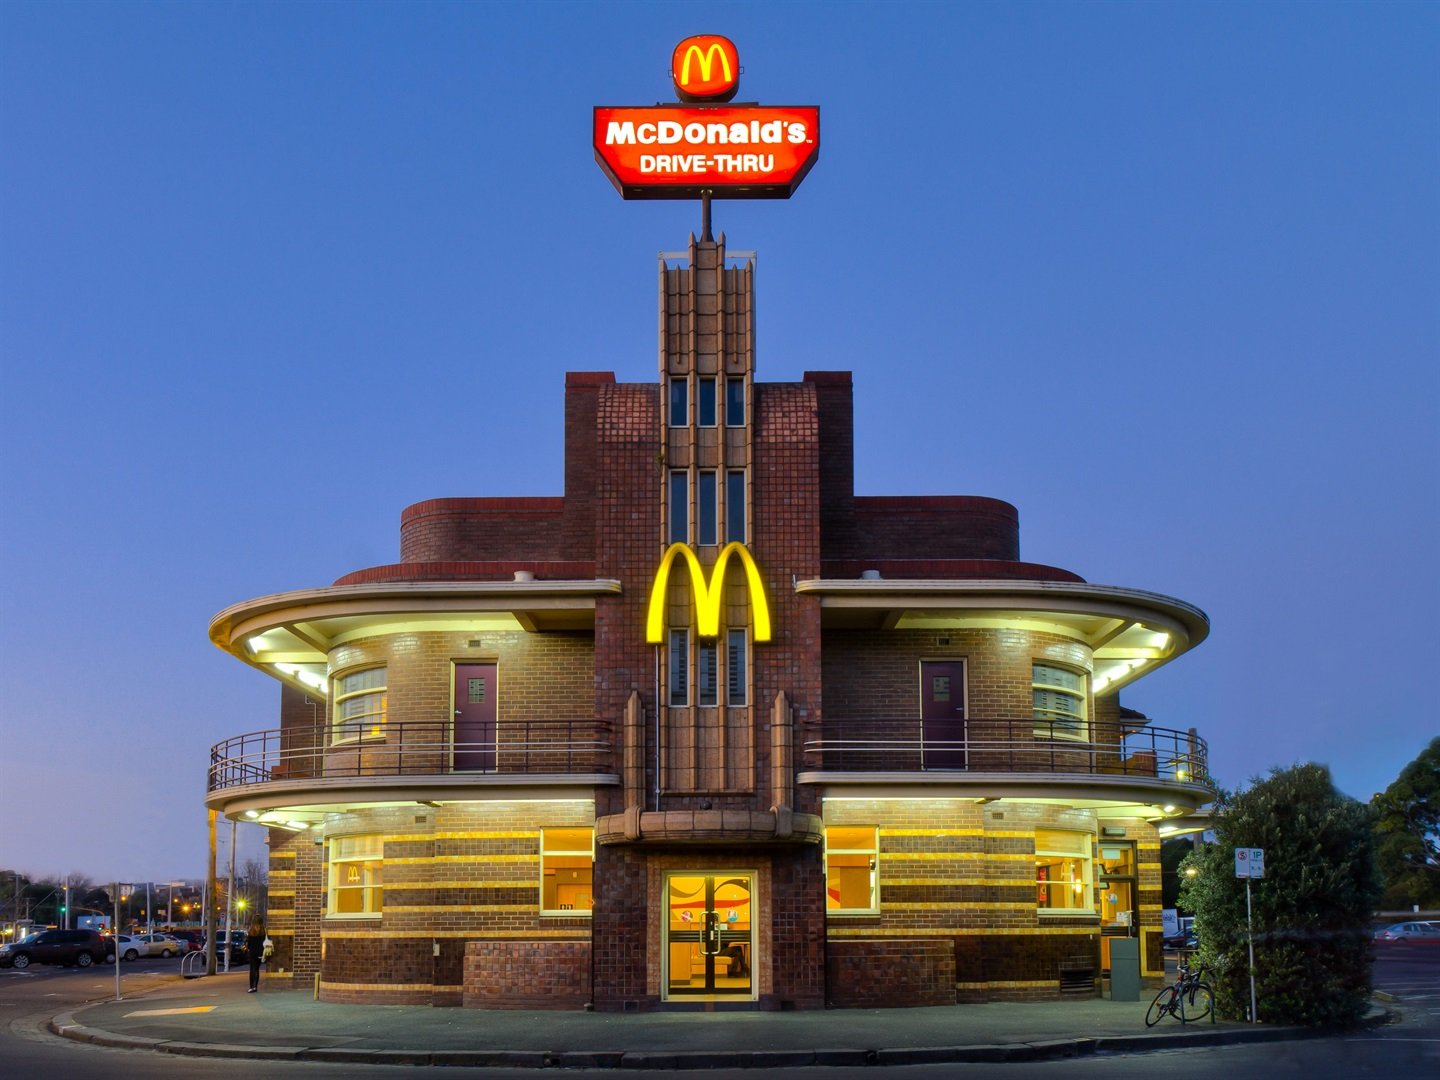 24 Of The Weirdest And Most Unique Mcdonalds Restaurants In The World Business Insider 